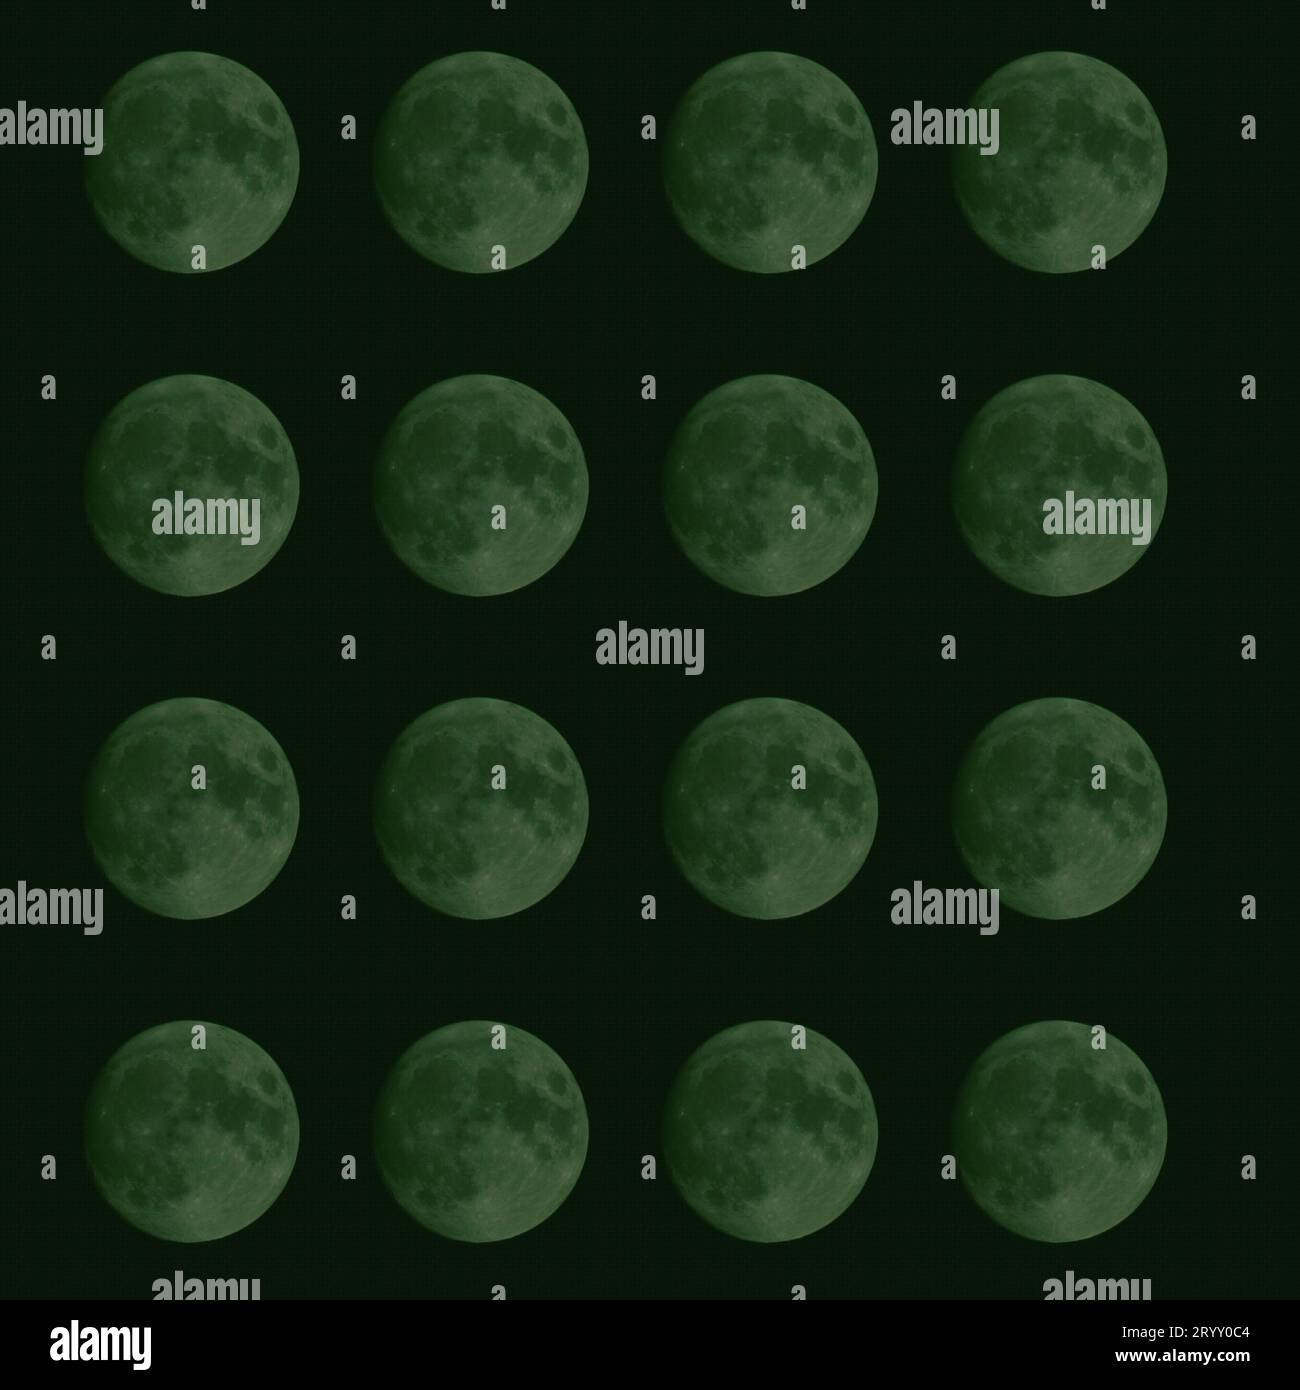 16 Images of the Moon, Green Tinti with Screen Mesh Effect, 9/27/2023 Stock Photo